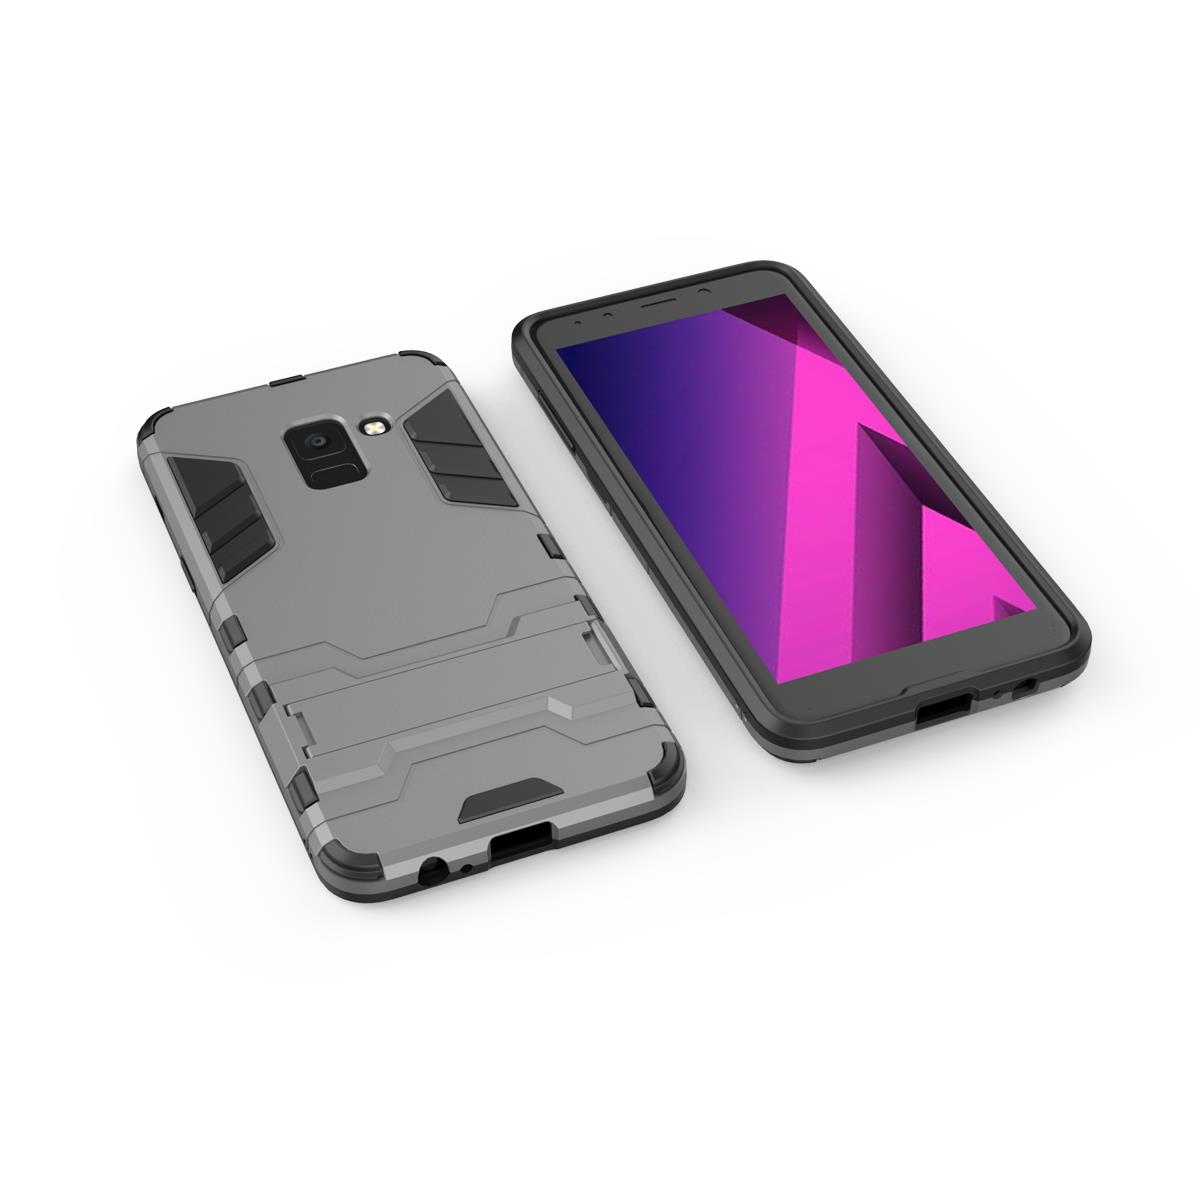 Bakeey-2-in-1-Armor-Kickstand-Hard-PC-Protective-Case-for-Samsung-Galaxy-A8-Plus-2018-1297009-4